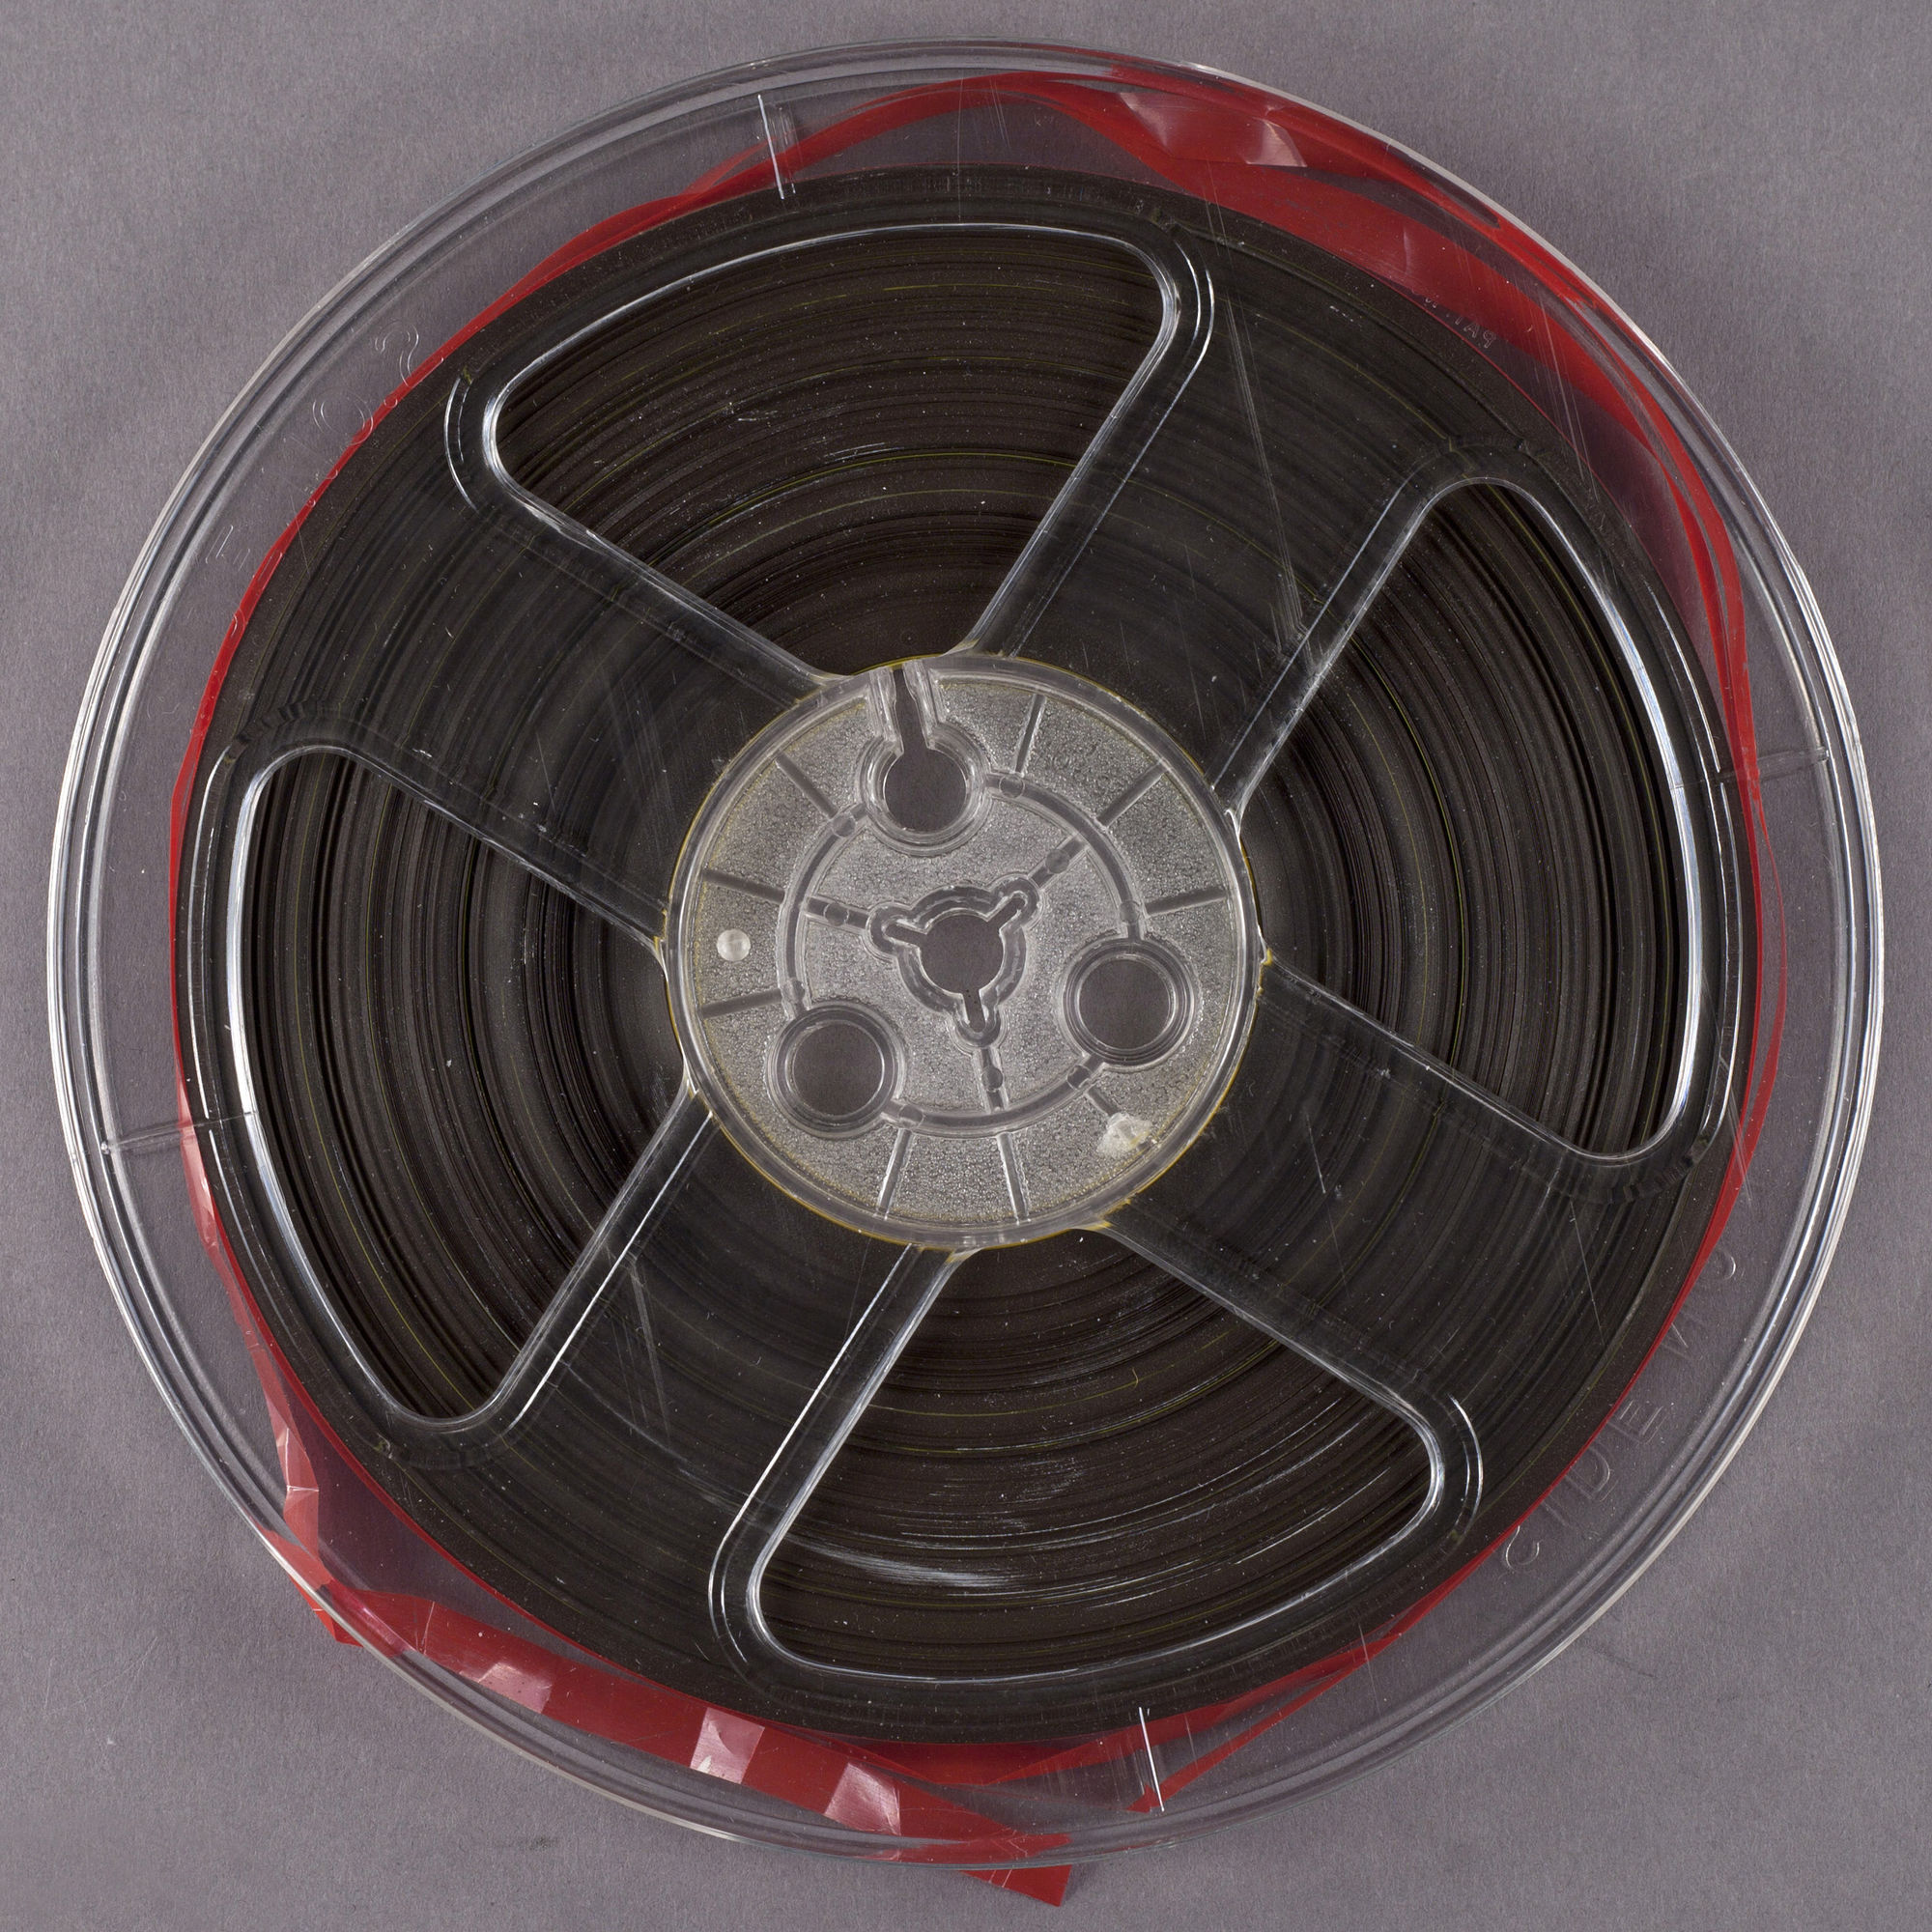 Audiotape / Capitol High Performance Sound Tape - Reel to Reel